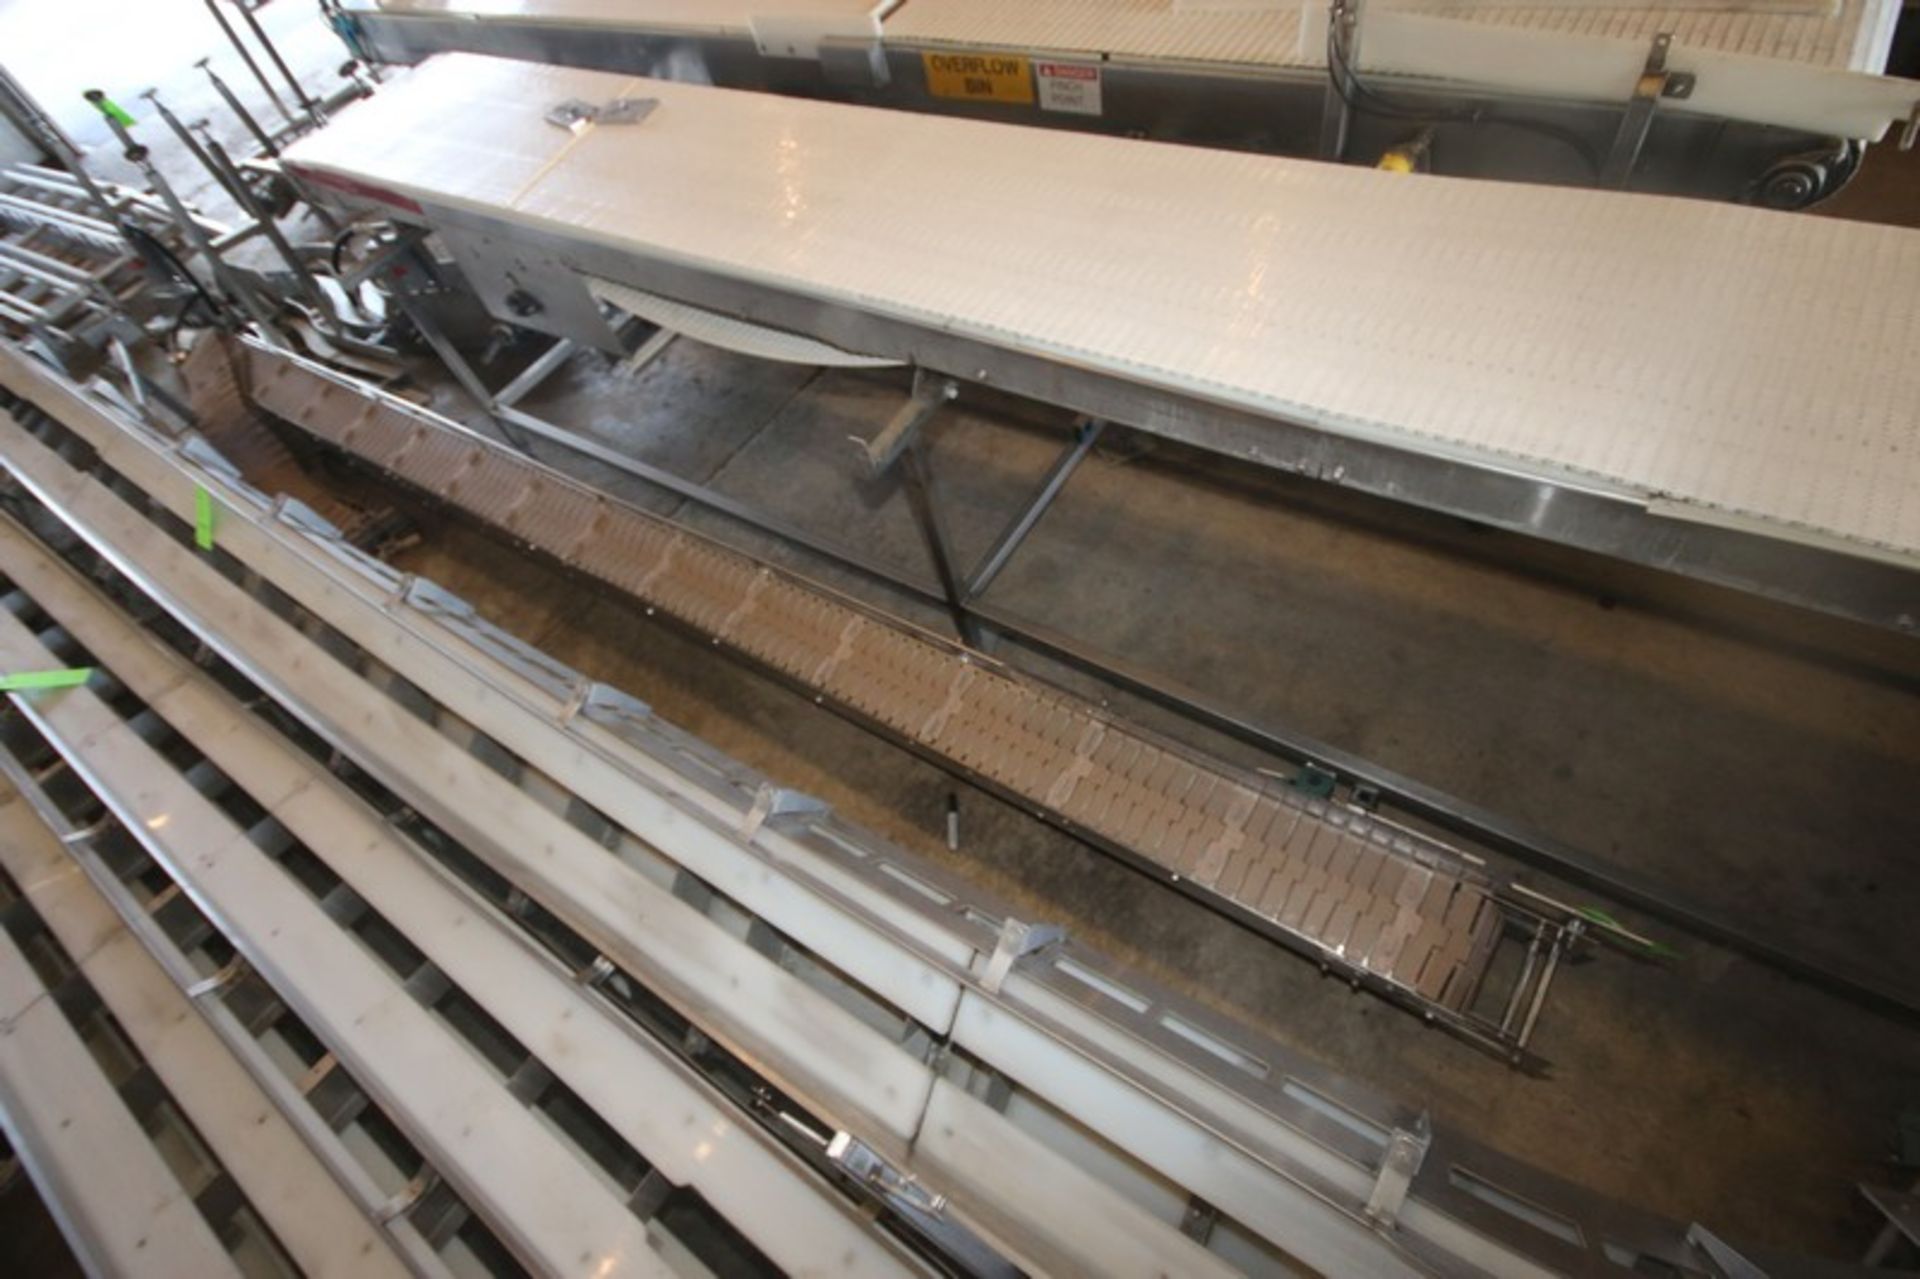 Straight Section of Flighted S/S Conveyor, with Flights, Aprox. 12" W Flights, Overall Length Aprox.